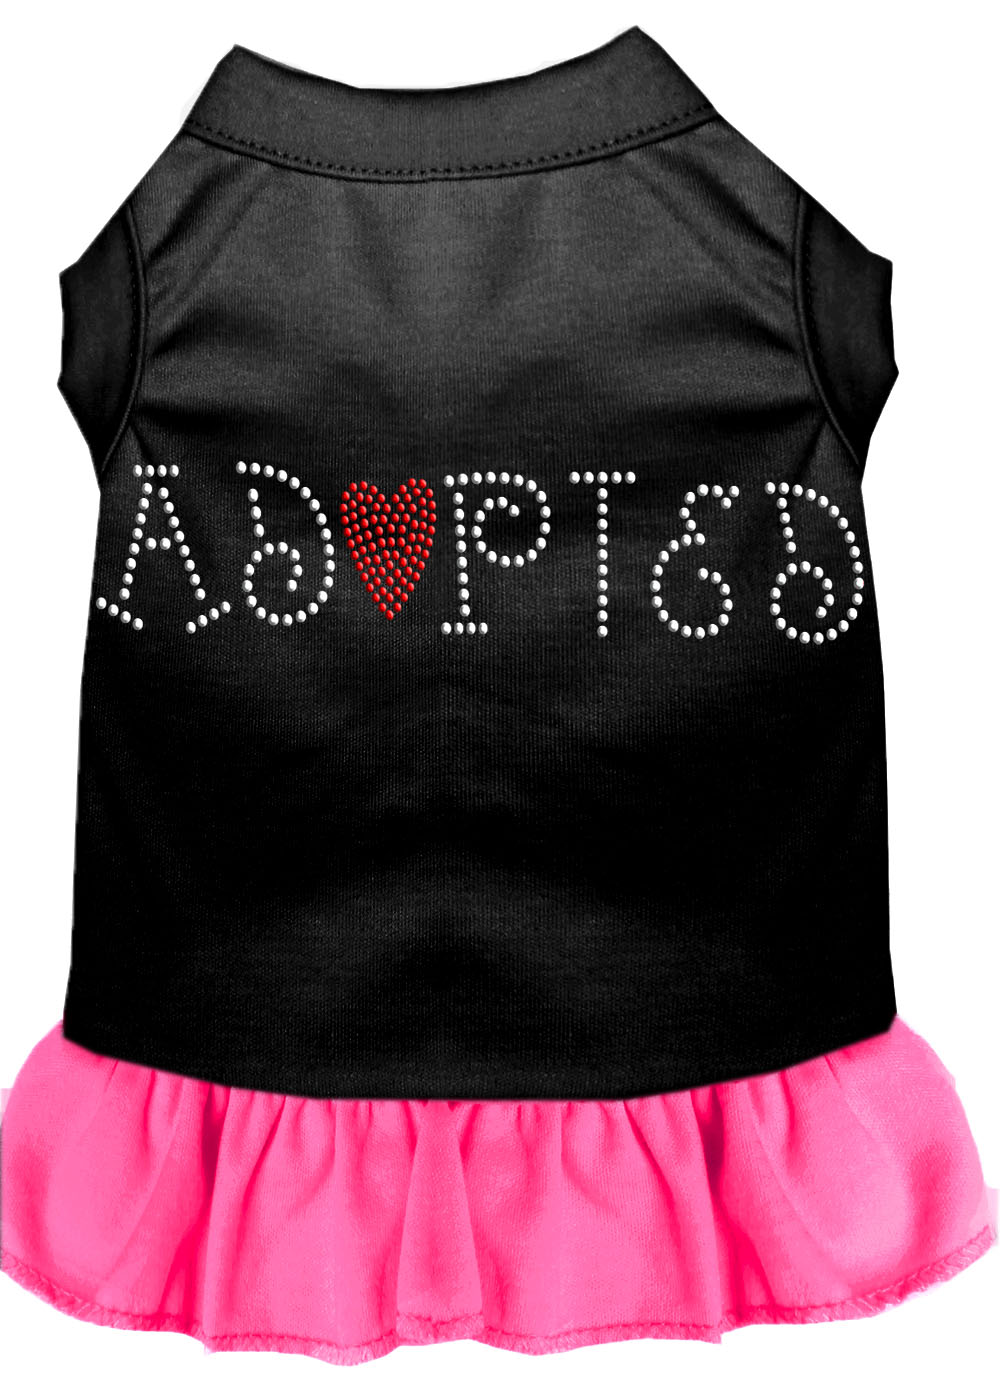 Adopted Rhinestone Dress Black with Bright Pink Med